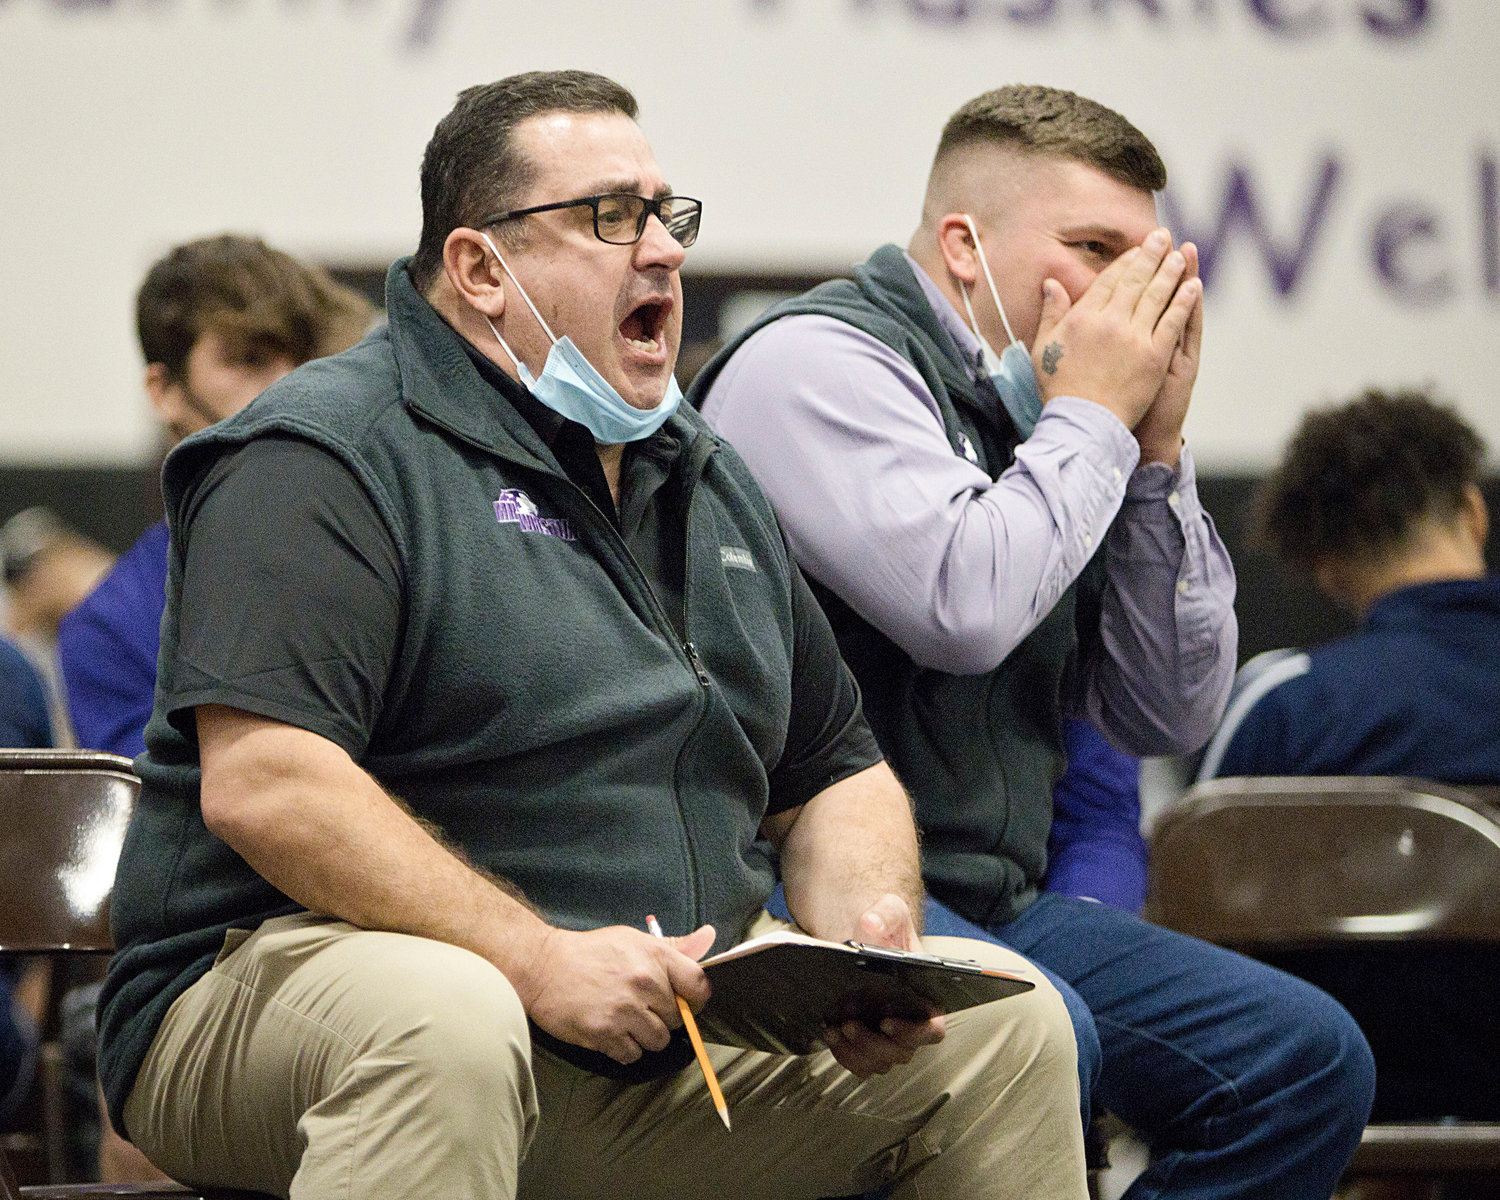 Huskies new head coach Mike Perreira (left) and assistant coach Colt Cotten, give advice to a Huskies wrestler during the Sharon Lombardo tournament at Mt. Hope High School on Saturday.